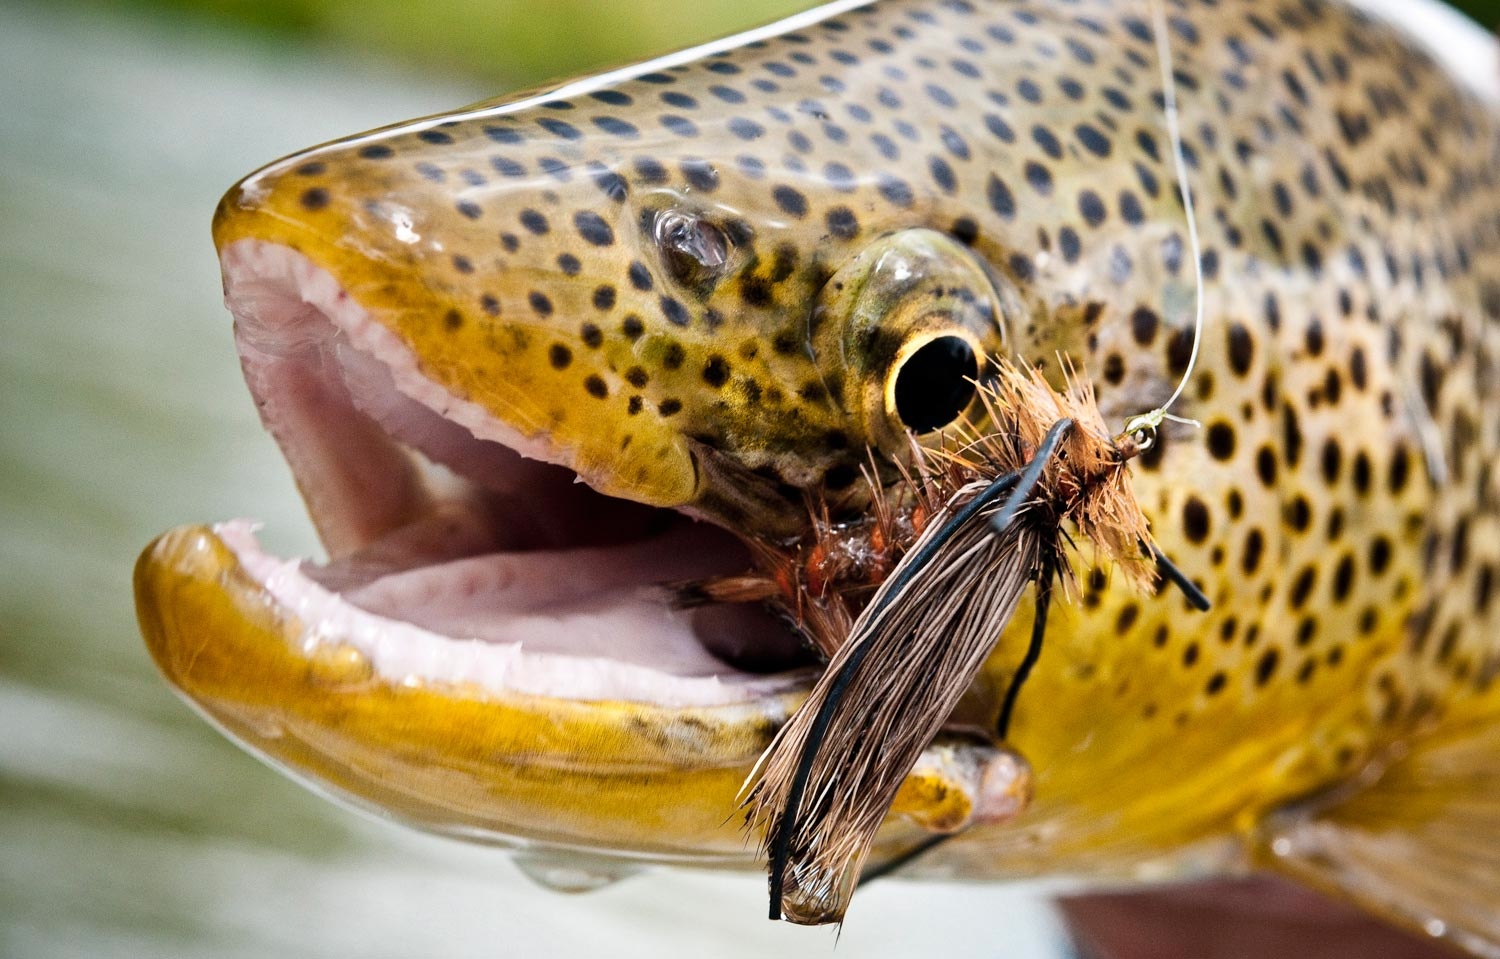 https://www.ginkandgasoline.com/wp-content/uploads/2013/09/fly-fishing-brown-trout.jpg